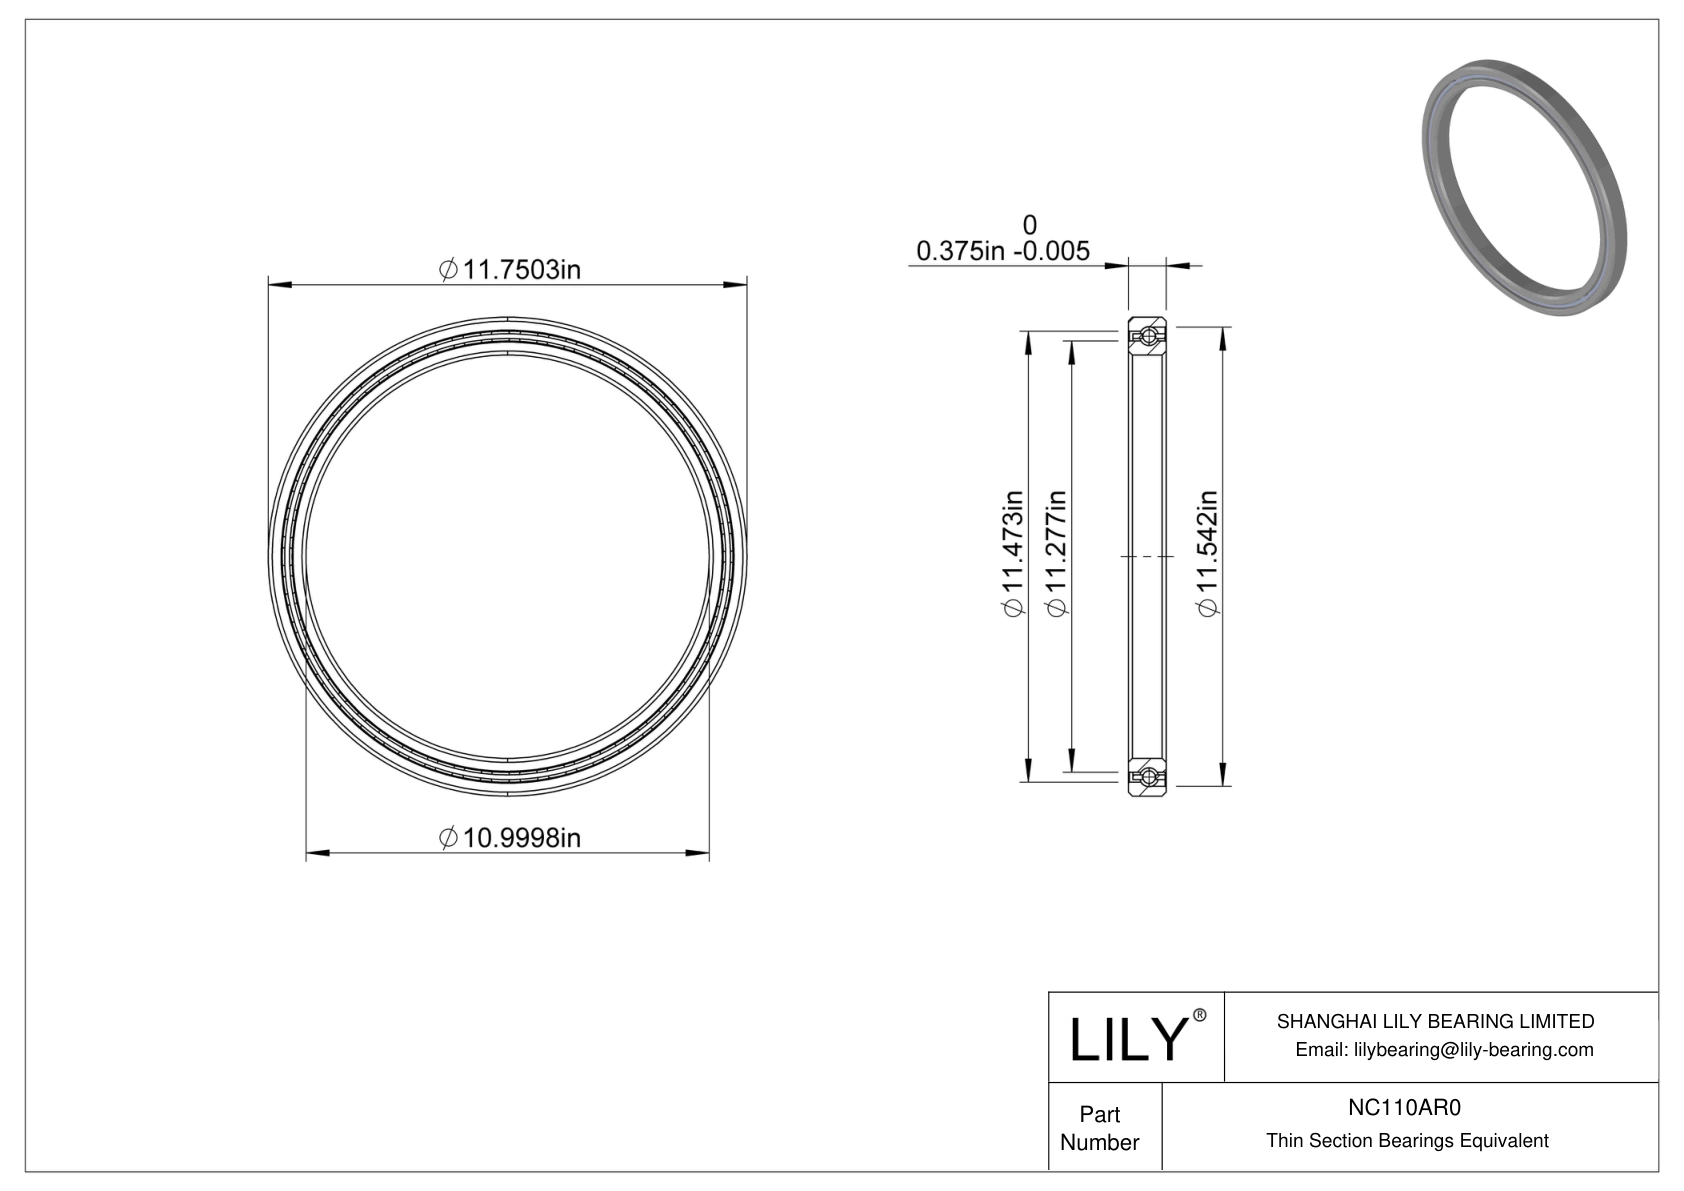 NC110AR0 Constant Section (CS) Bearings cad drawing